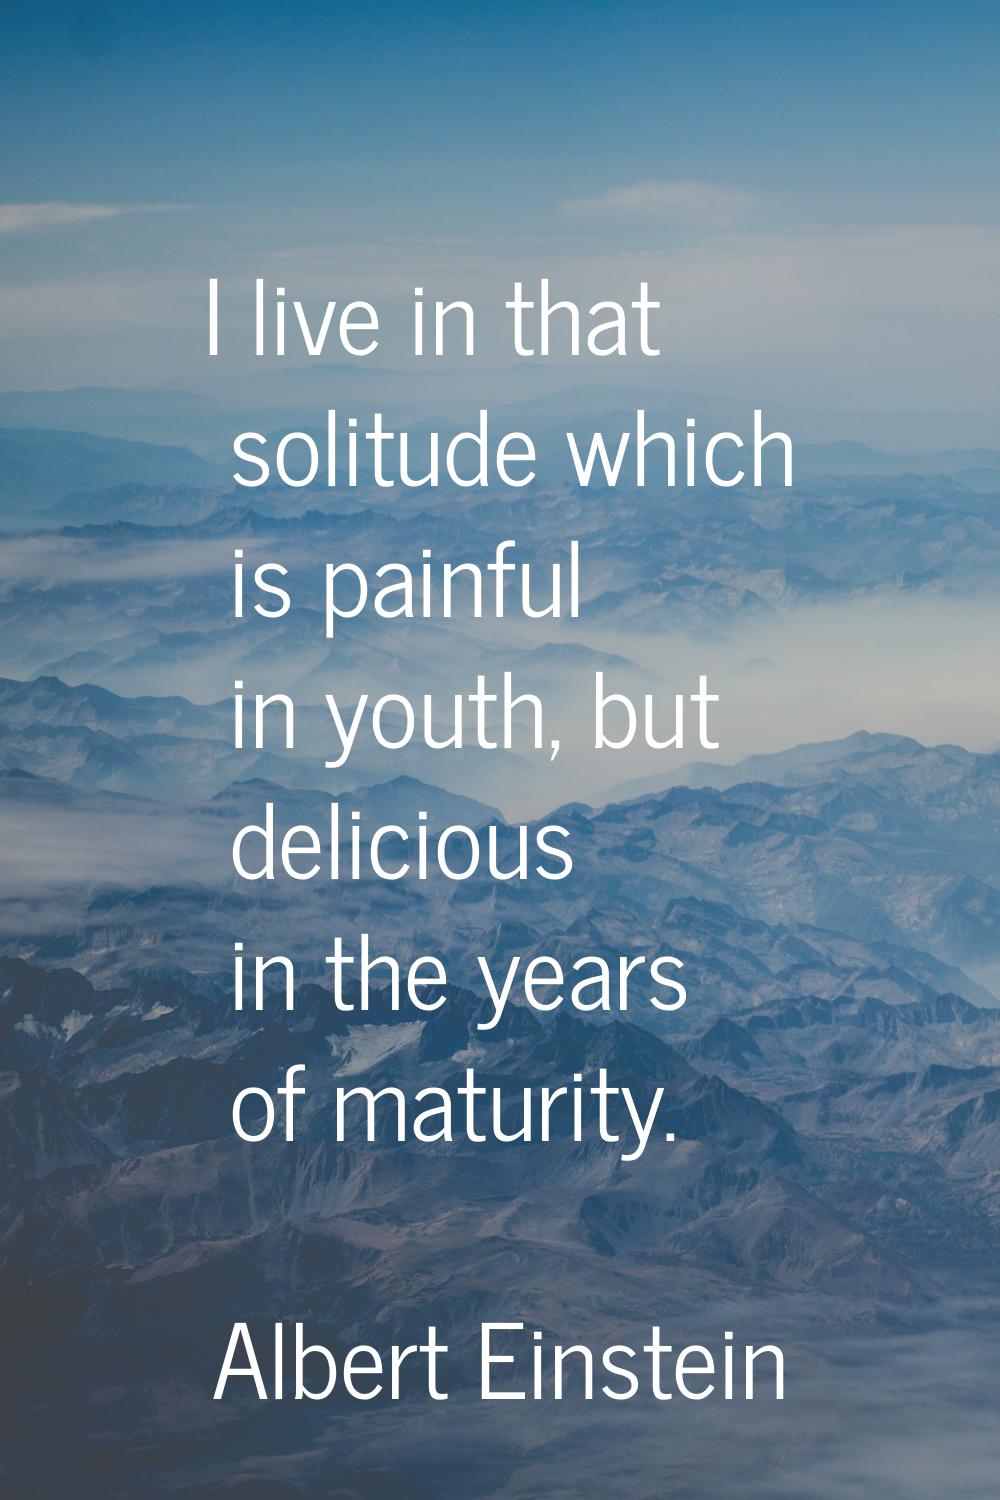 I live in that solitude which is painful in youth, but delicious in the years of maturity.